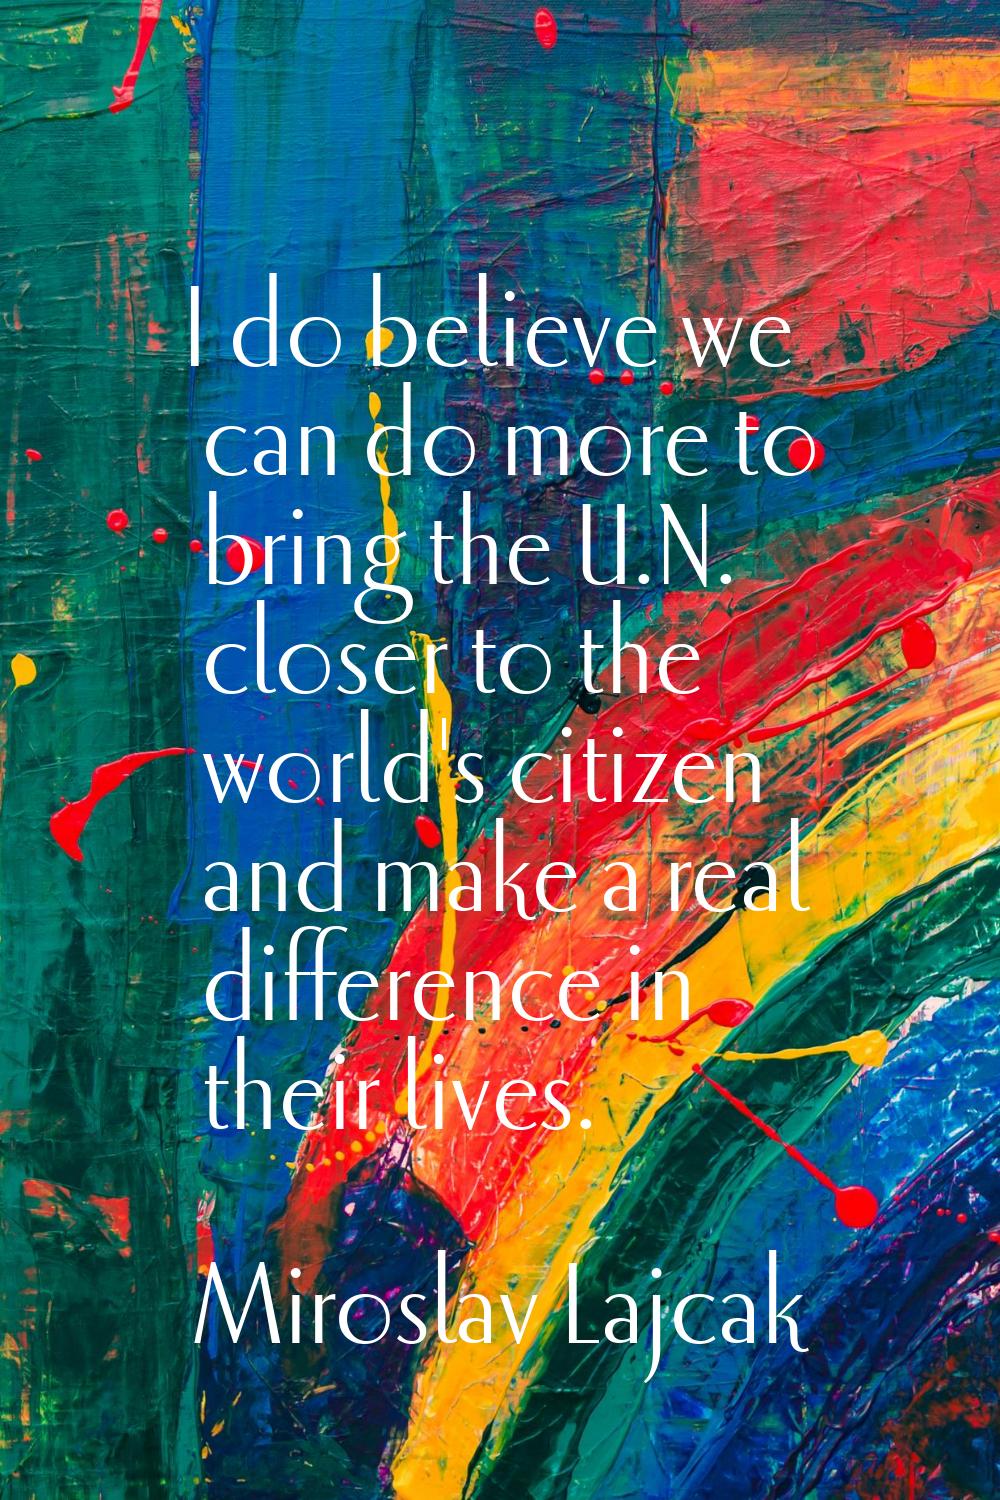 I do believe we can do more to bring the U.N. closer to the world's citizen and make a real differe